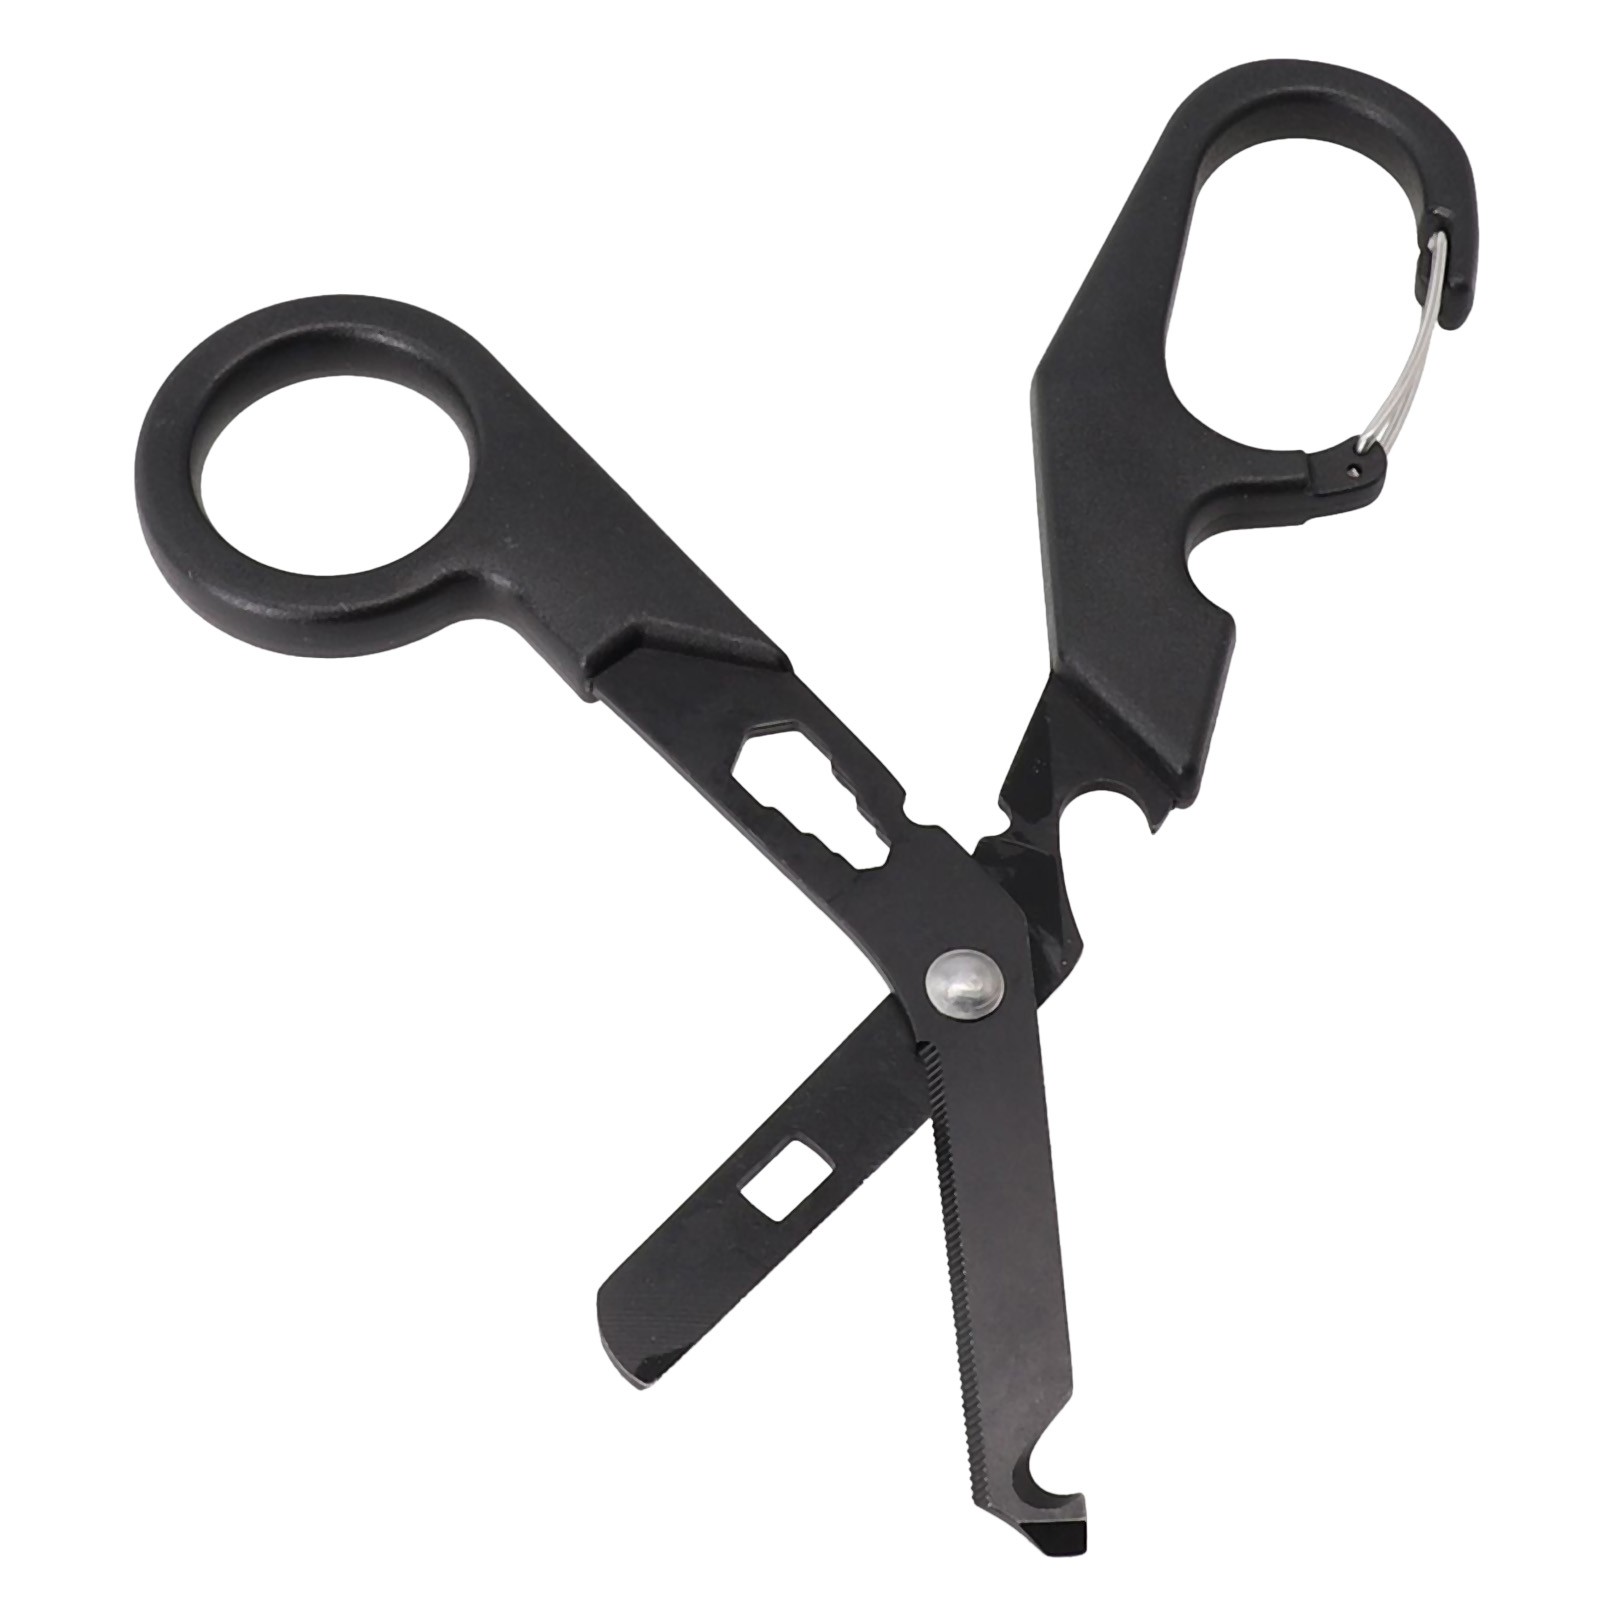 Sports Rescue Scissors Stainless Steel Survival Tool Trauma